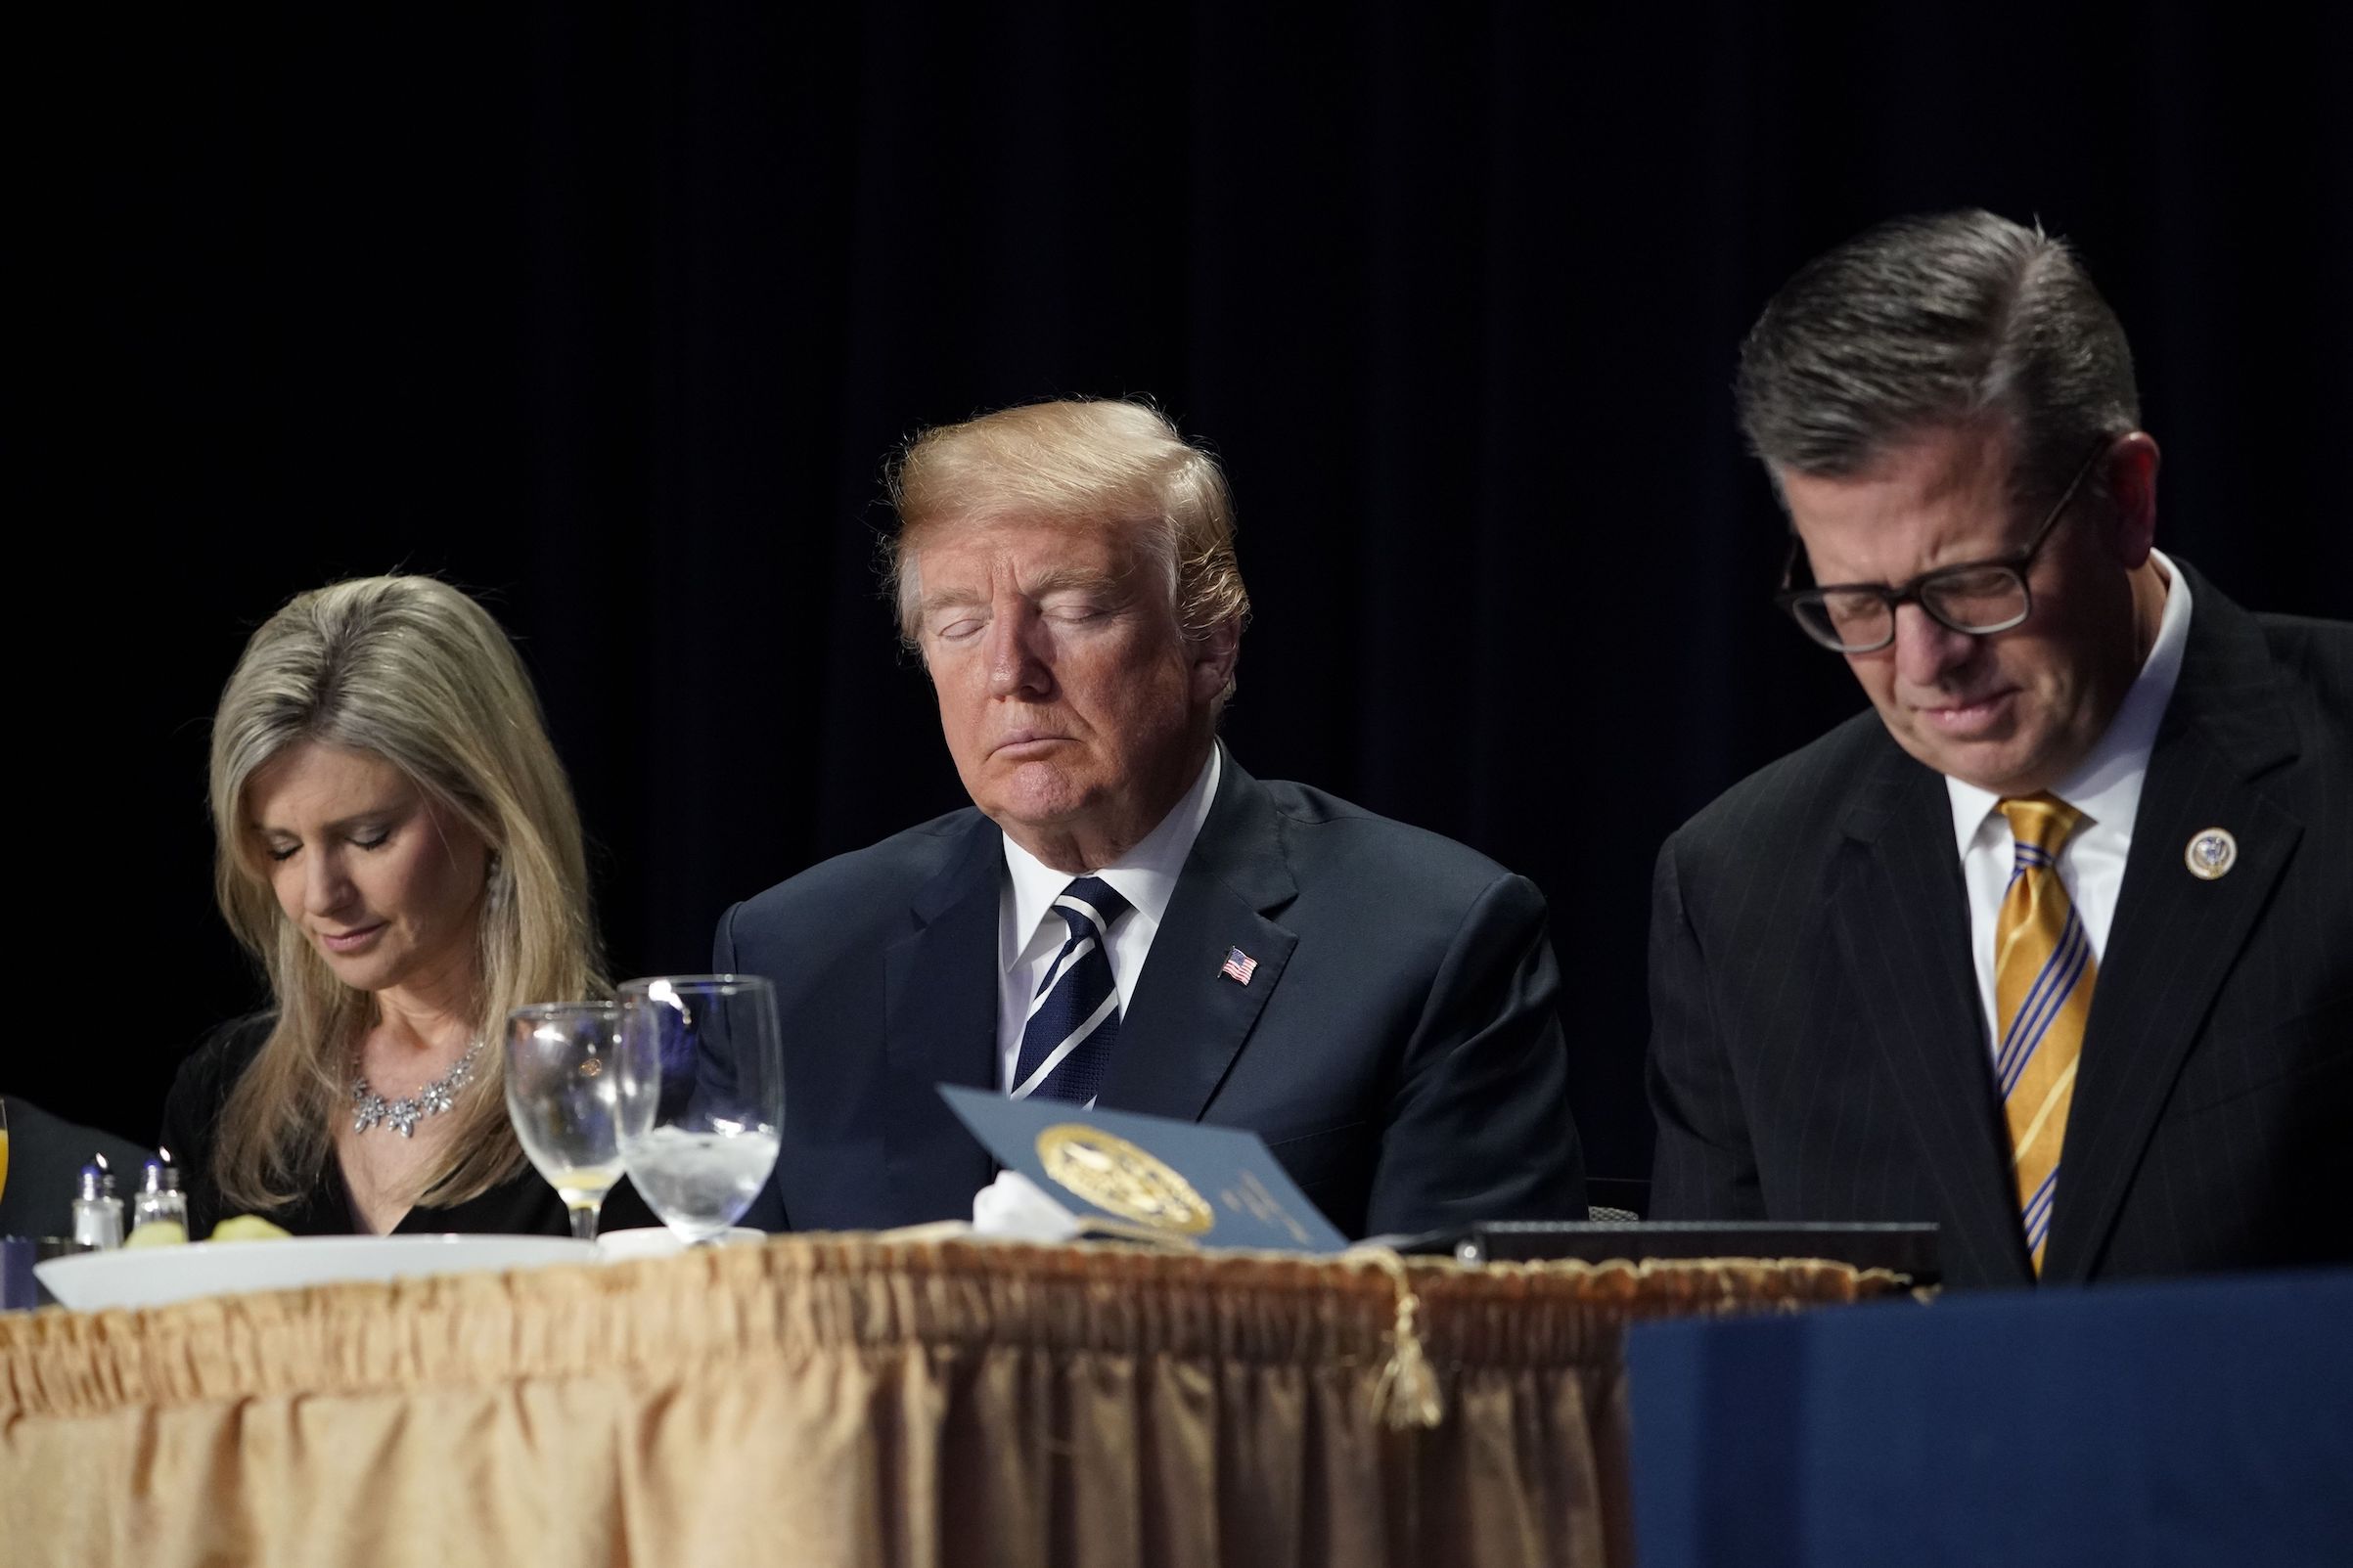 U.S. President Donald Trump (C) attends the National Prayer Breakfast at a hotel in Washington, D.C., on Feb. 8, 2018. (Mandel Ngan&mdash;AFP/Getty Images)